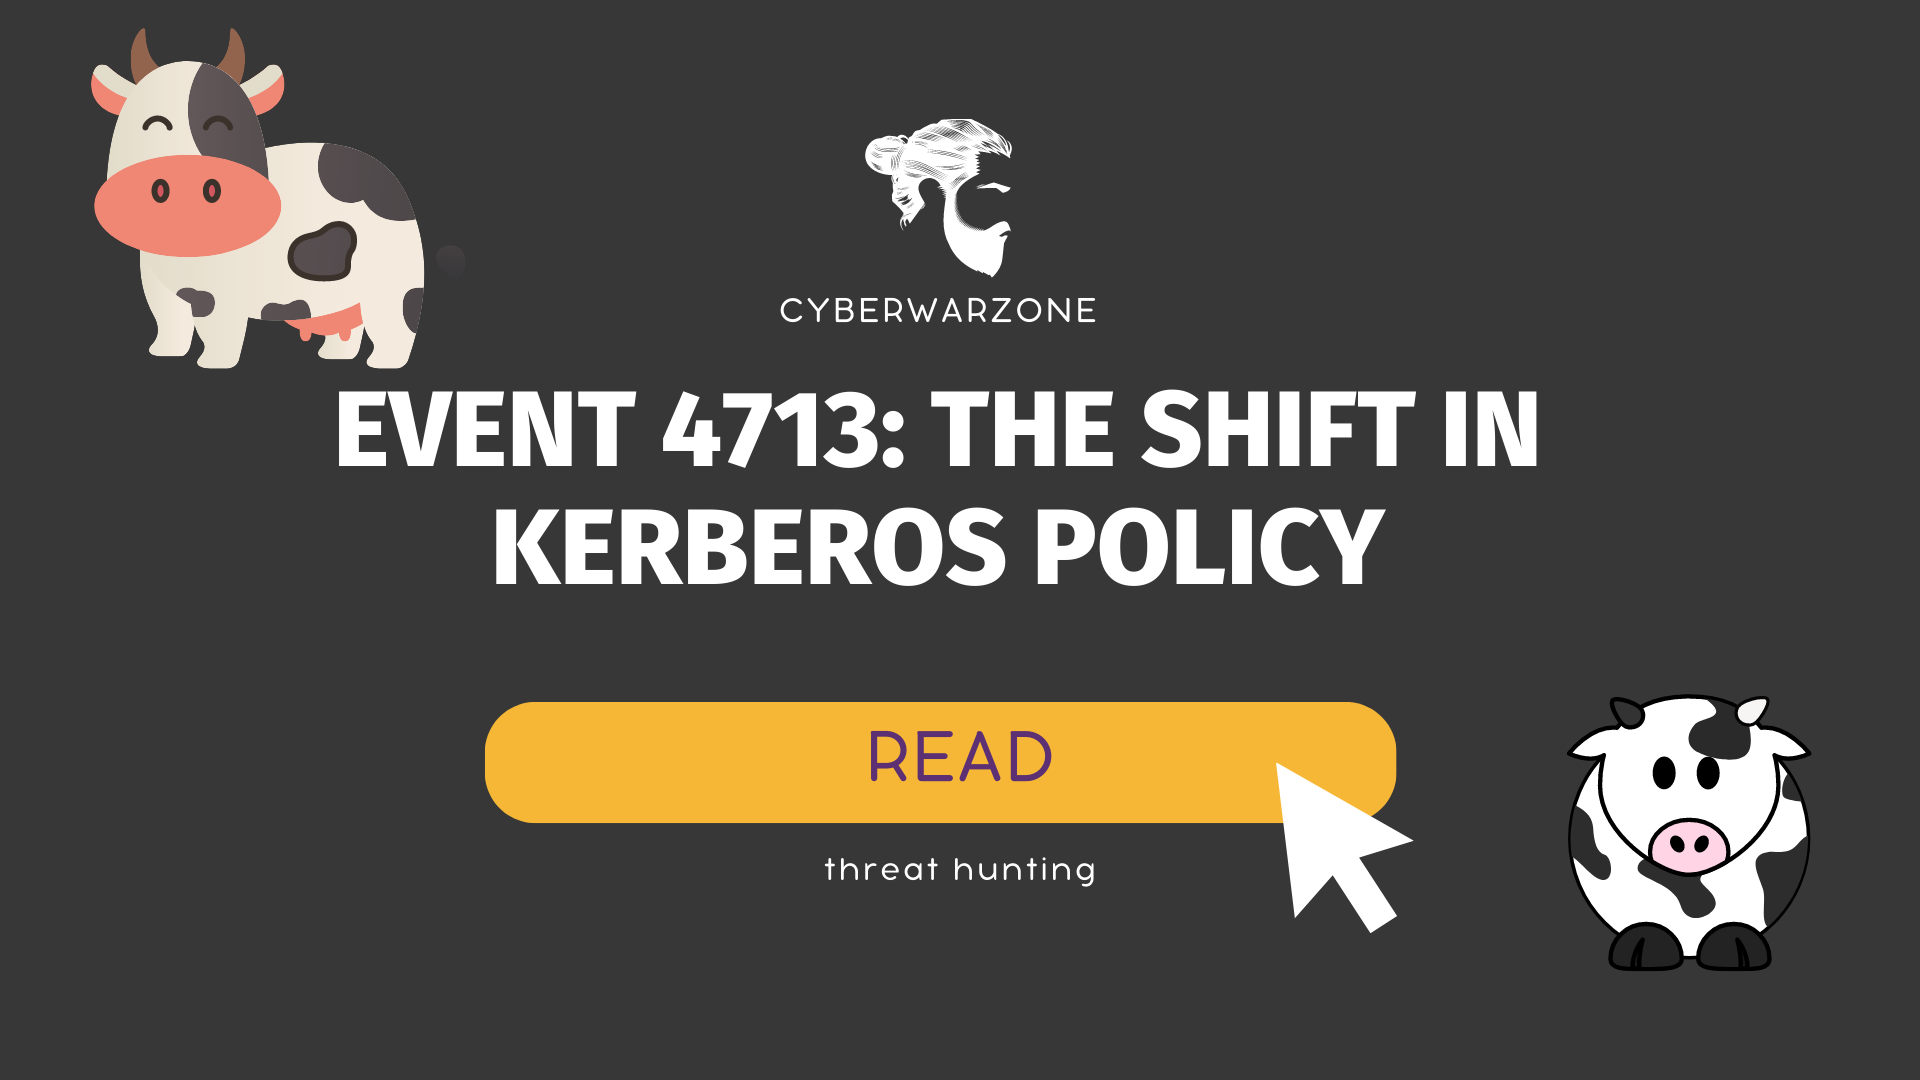 Event 4713: The Shift in Kerberos Policy